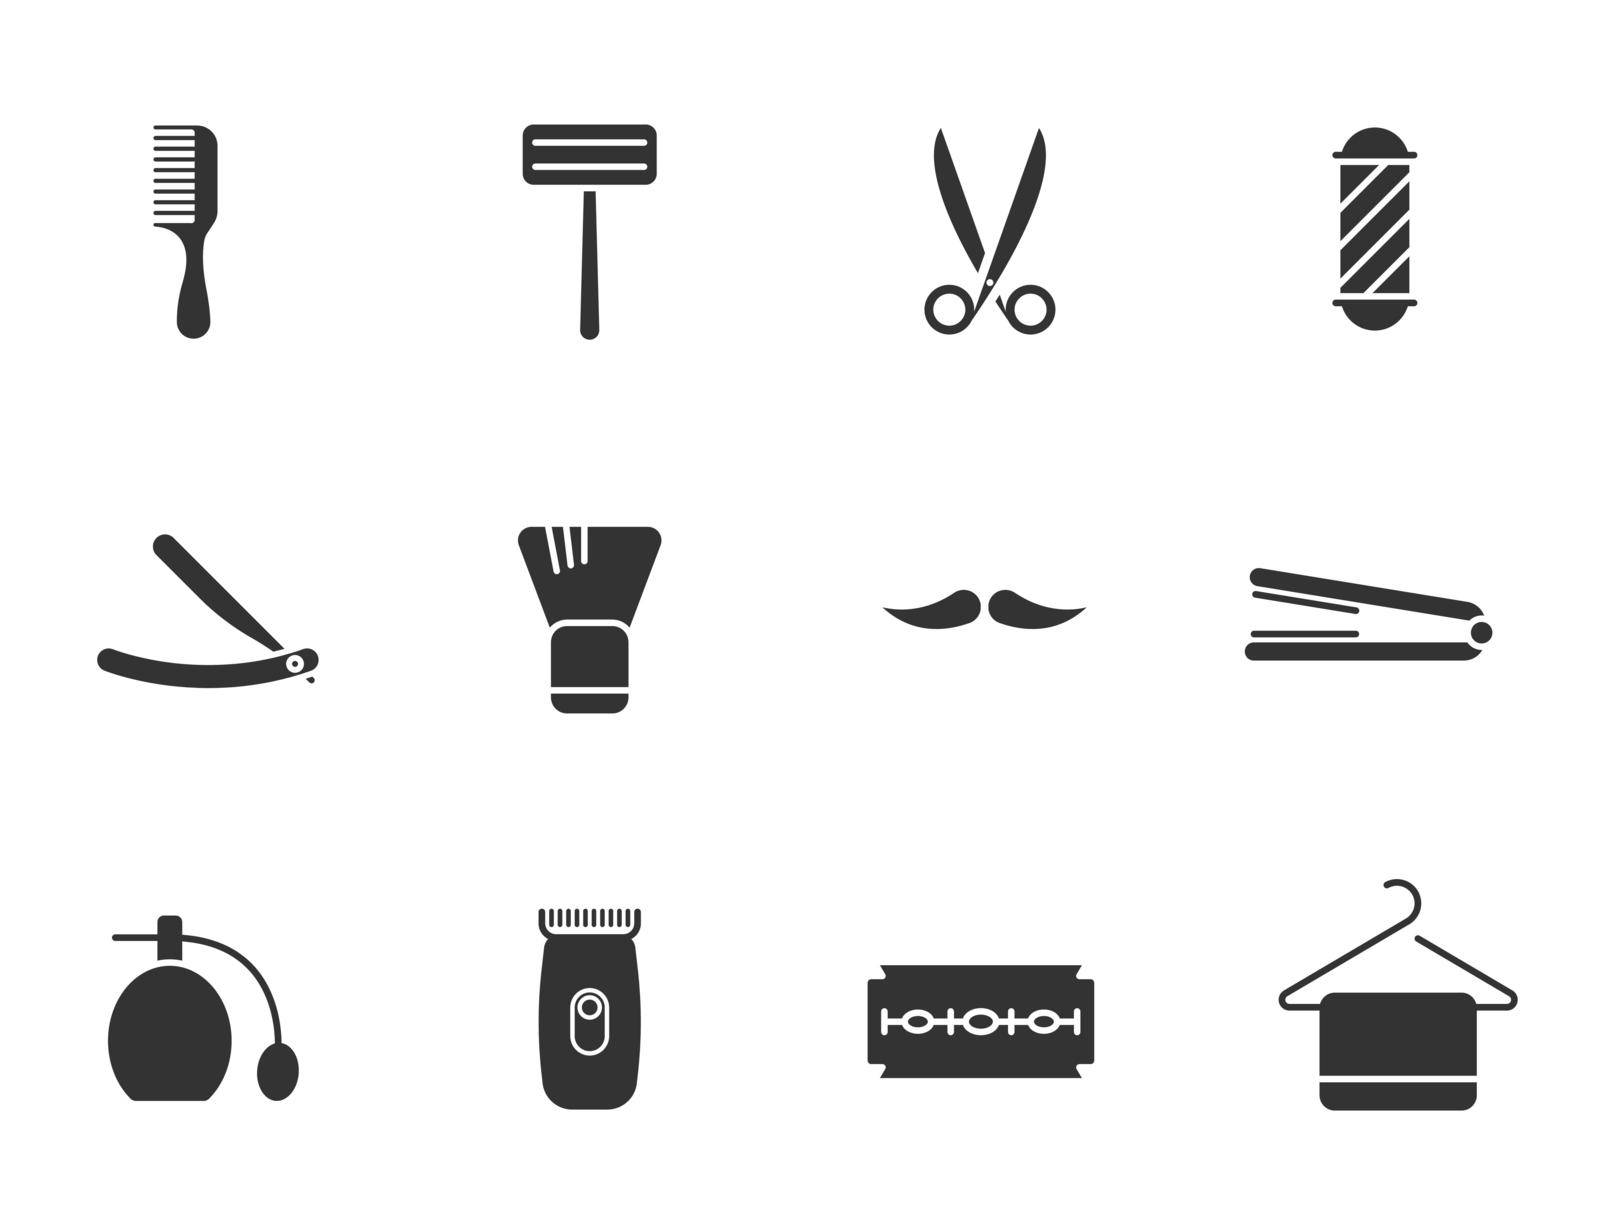 barber shop glyph vector icons isolated on white. hairdressing saloon icon set for web, mobile apps, ui design and print by govindamadhava108